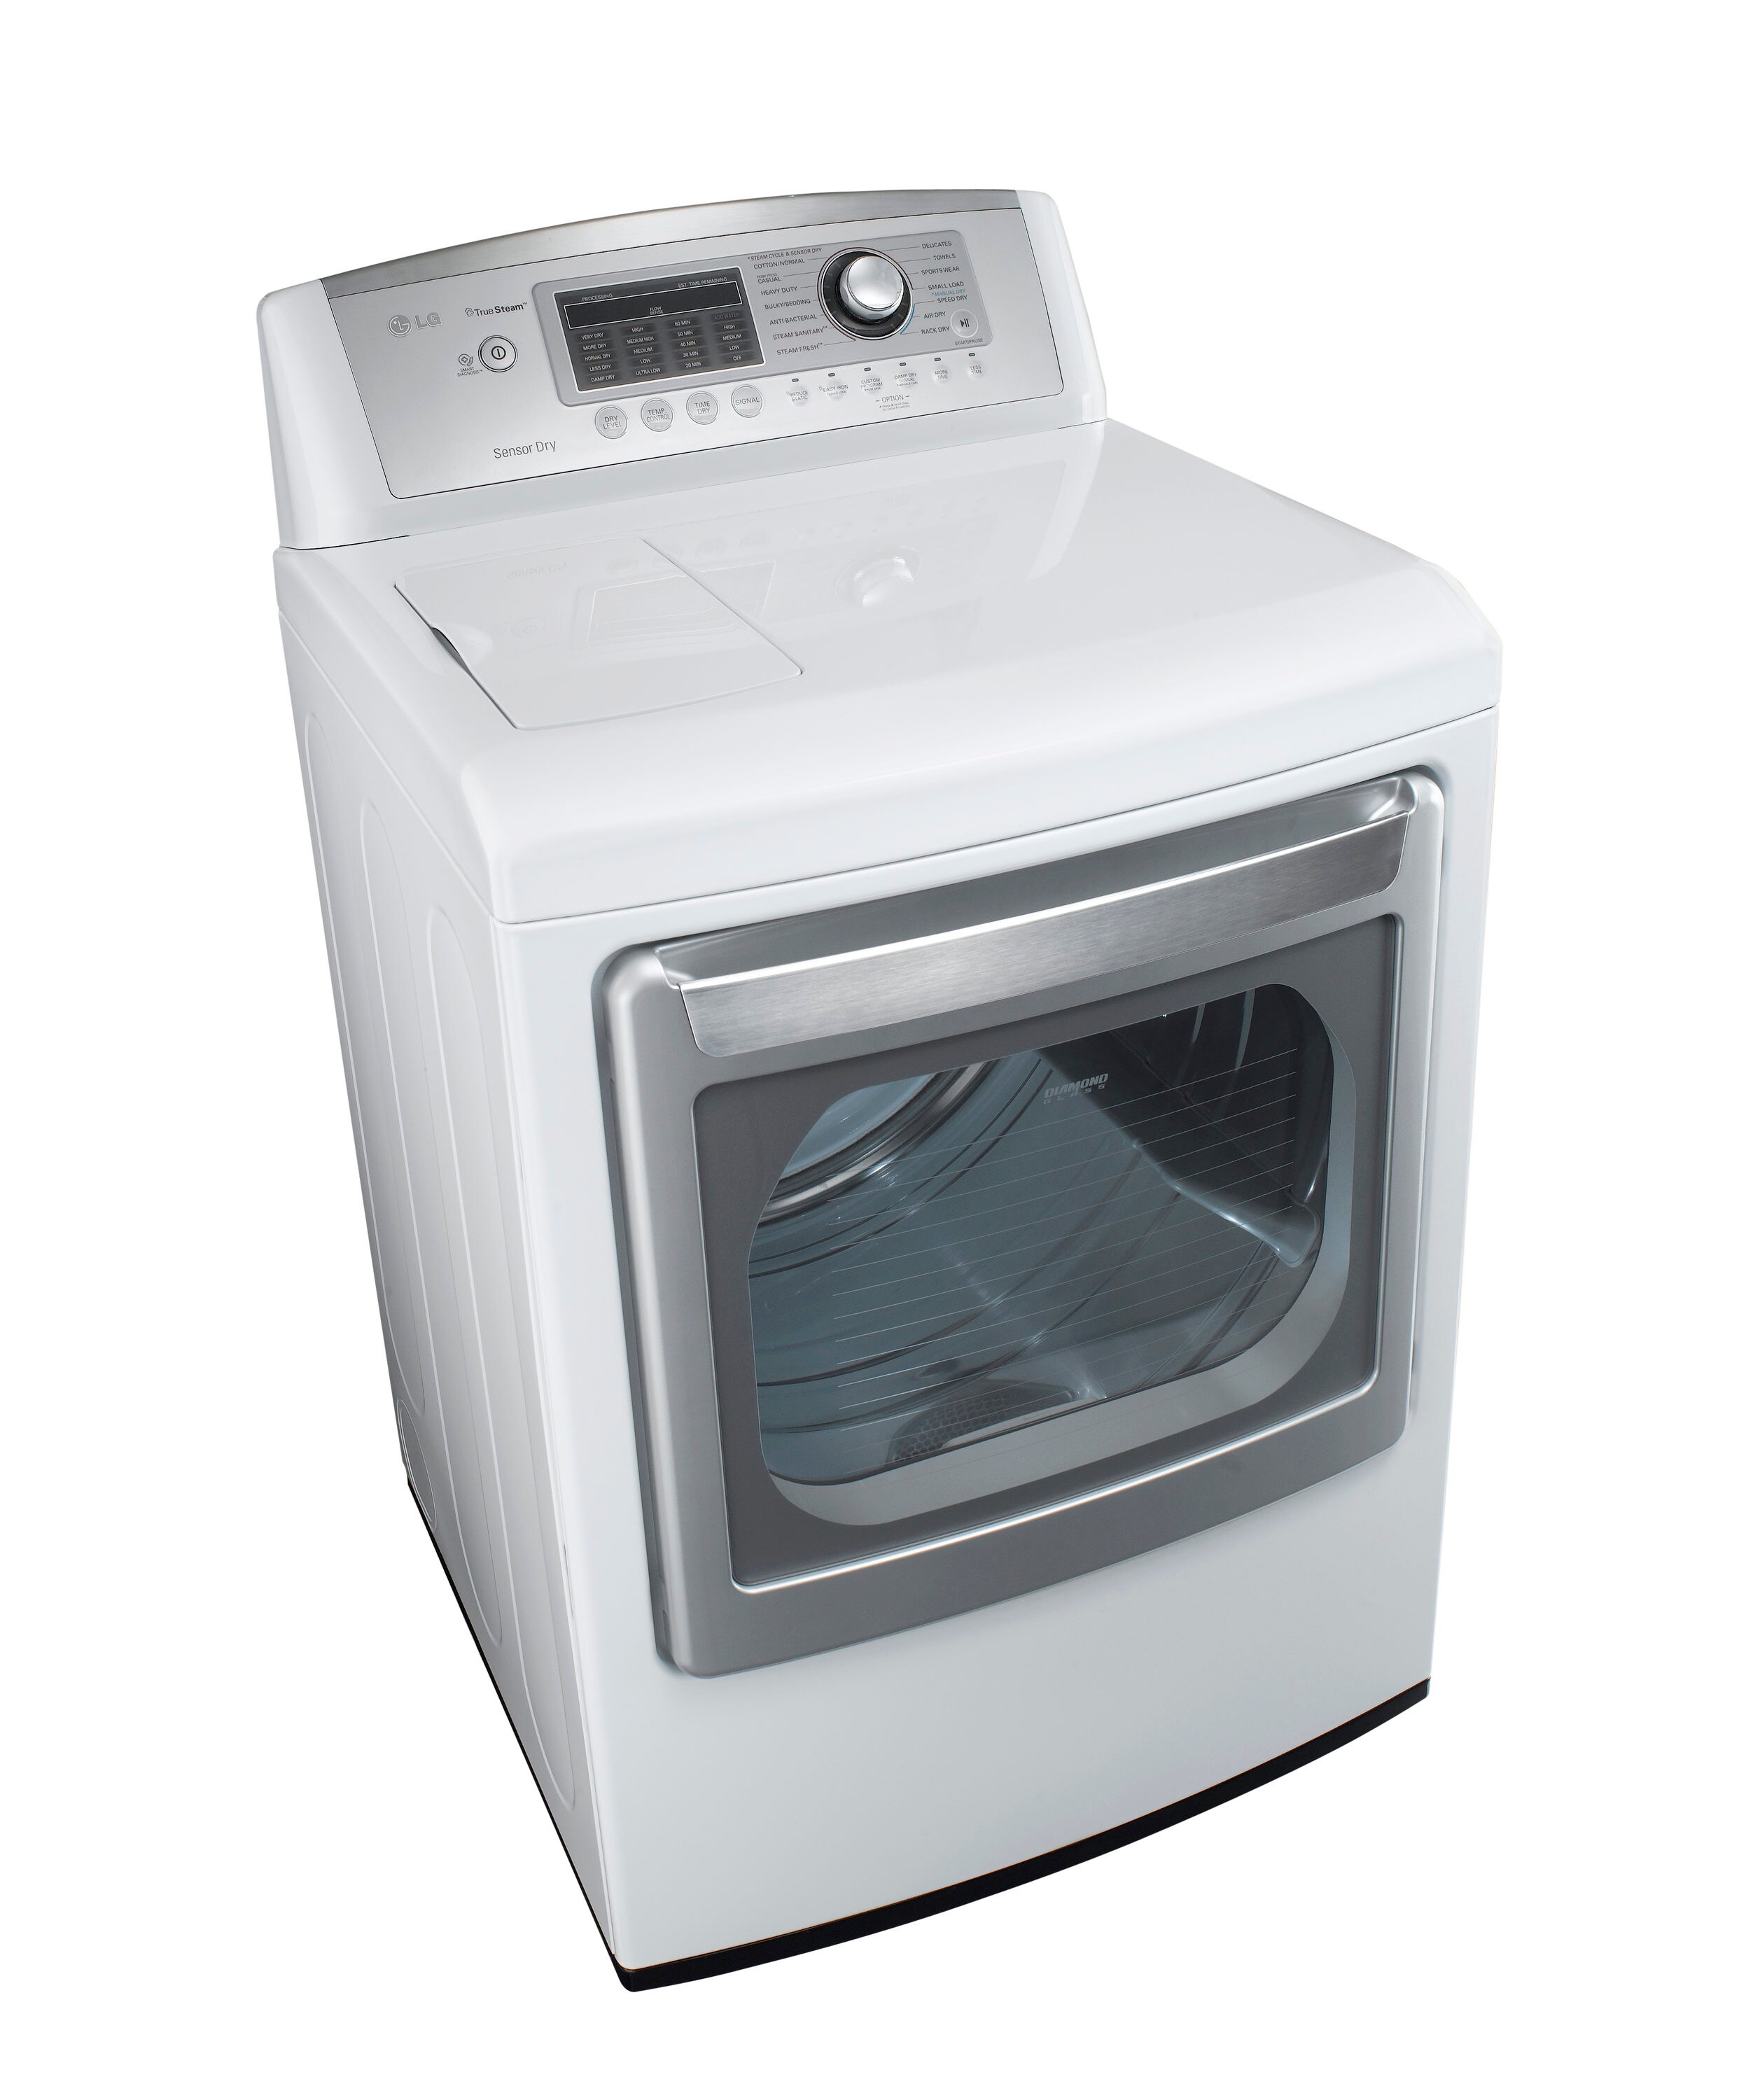 LG DLE2516W Electric Dryer With 5 Drying Programs